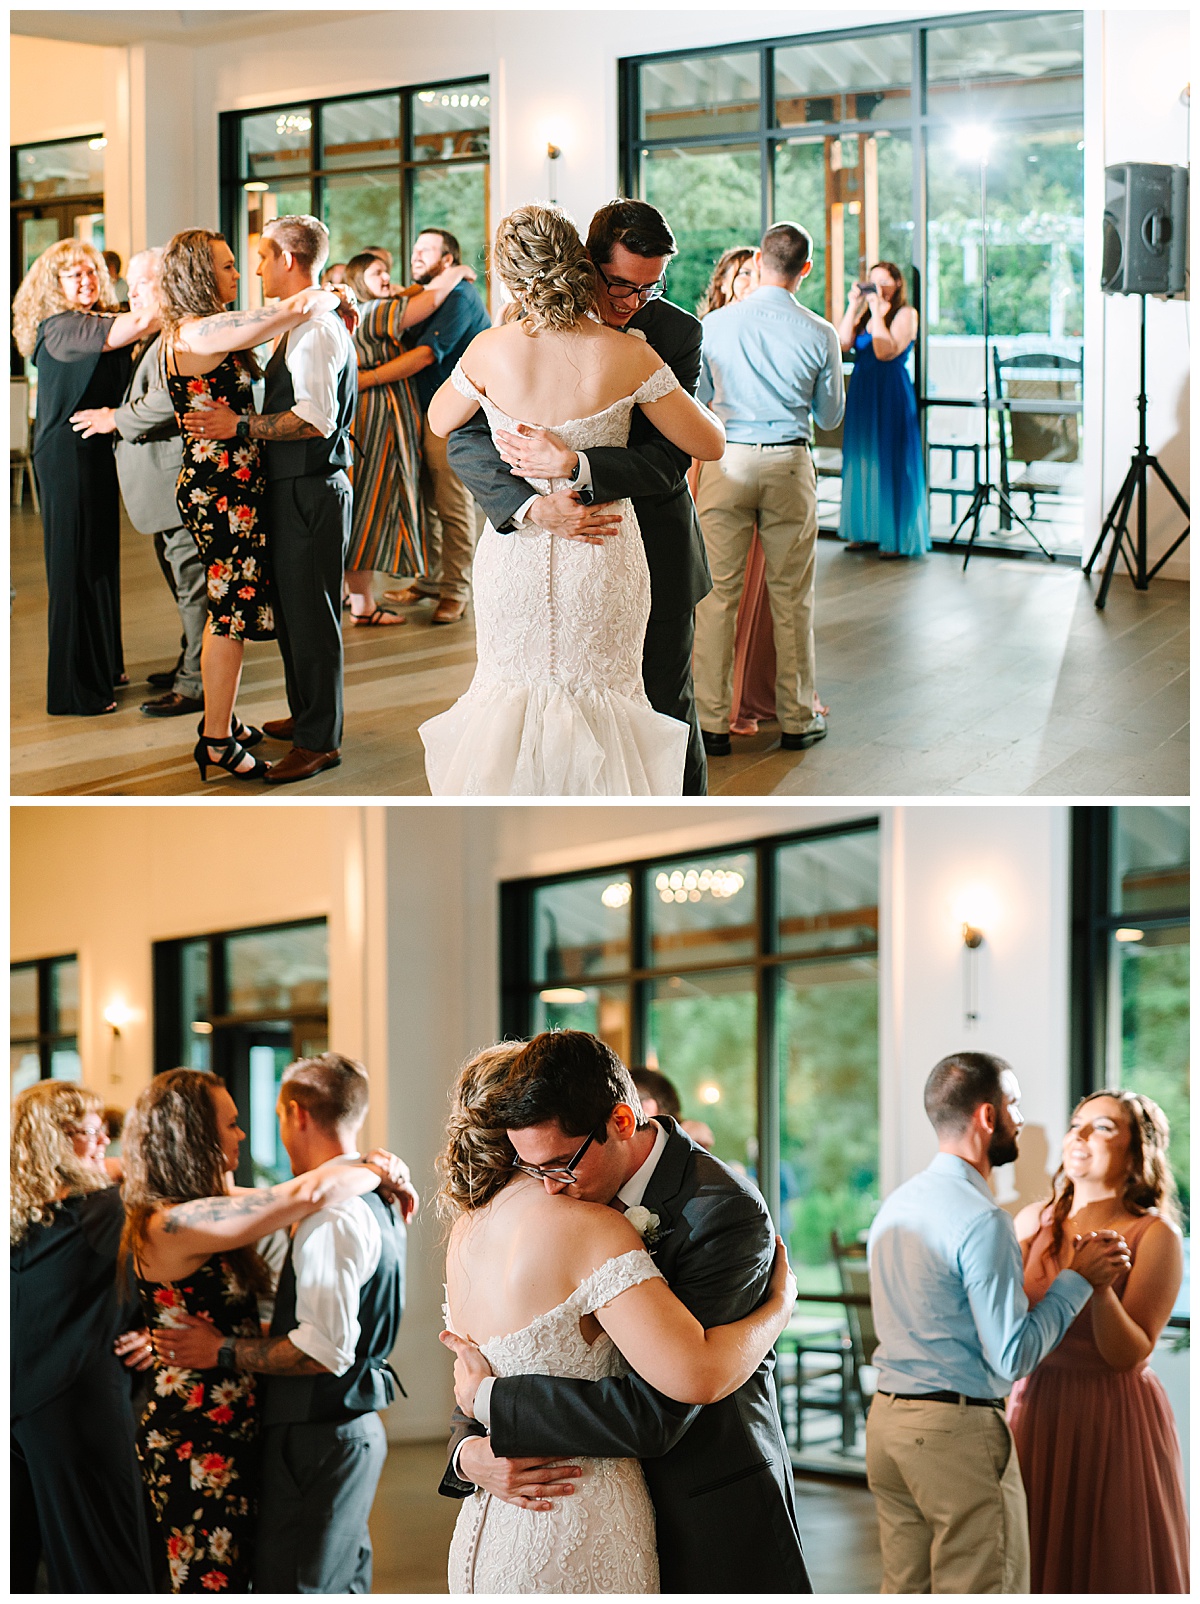 Newlyweds dance together at Bay Pointe Woods